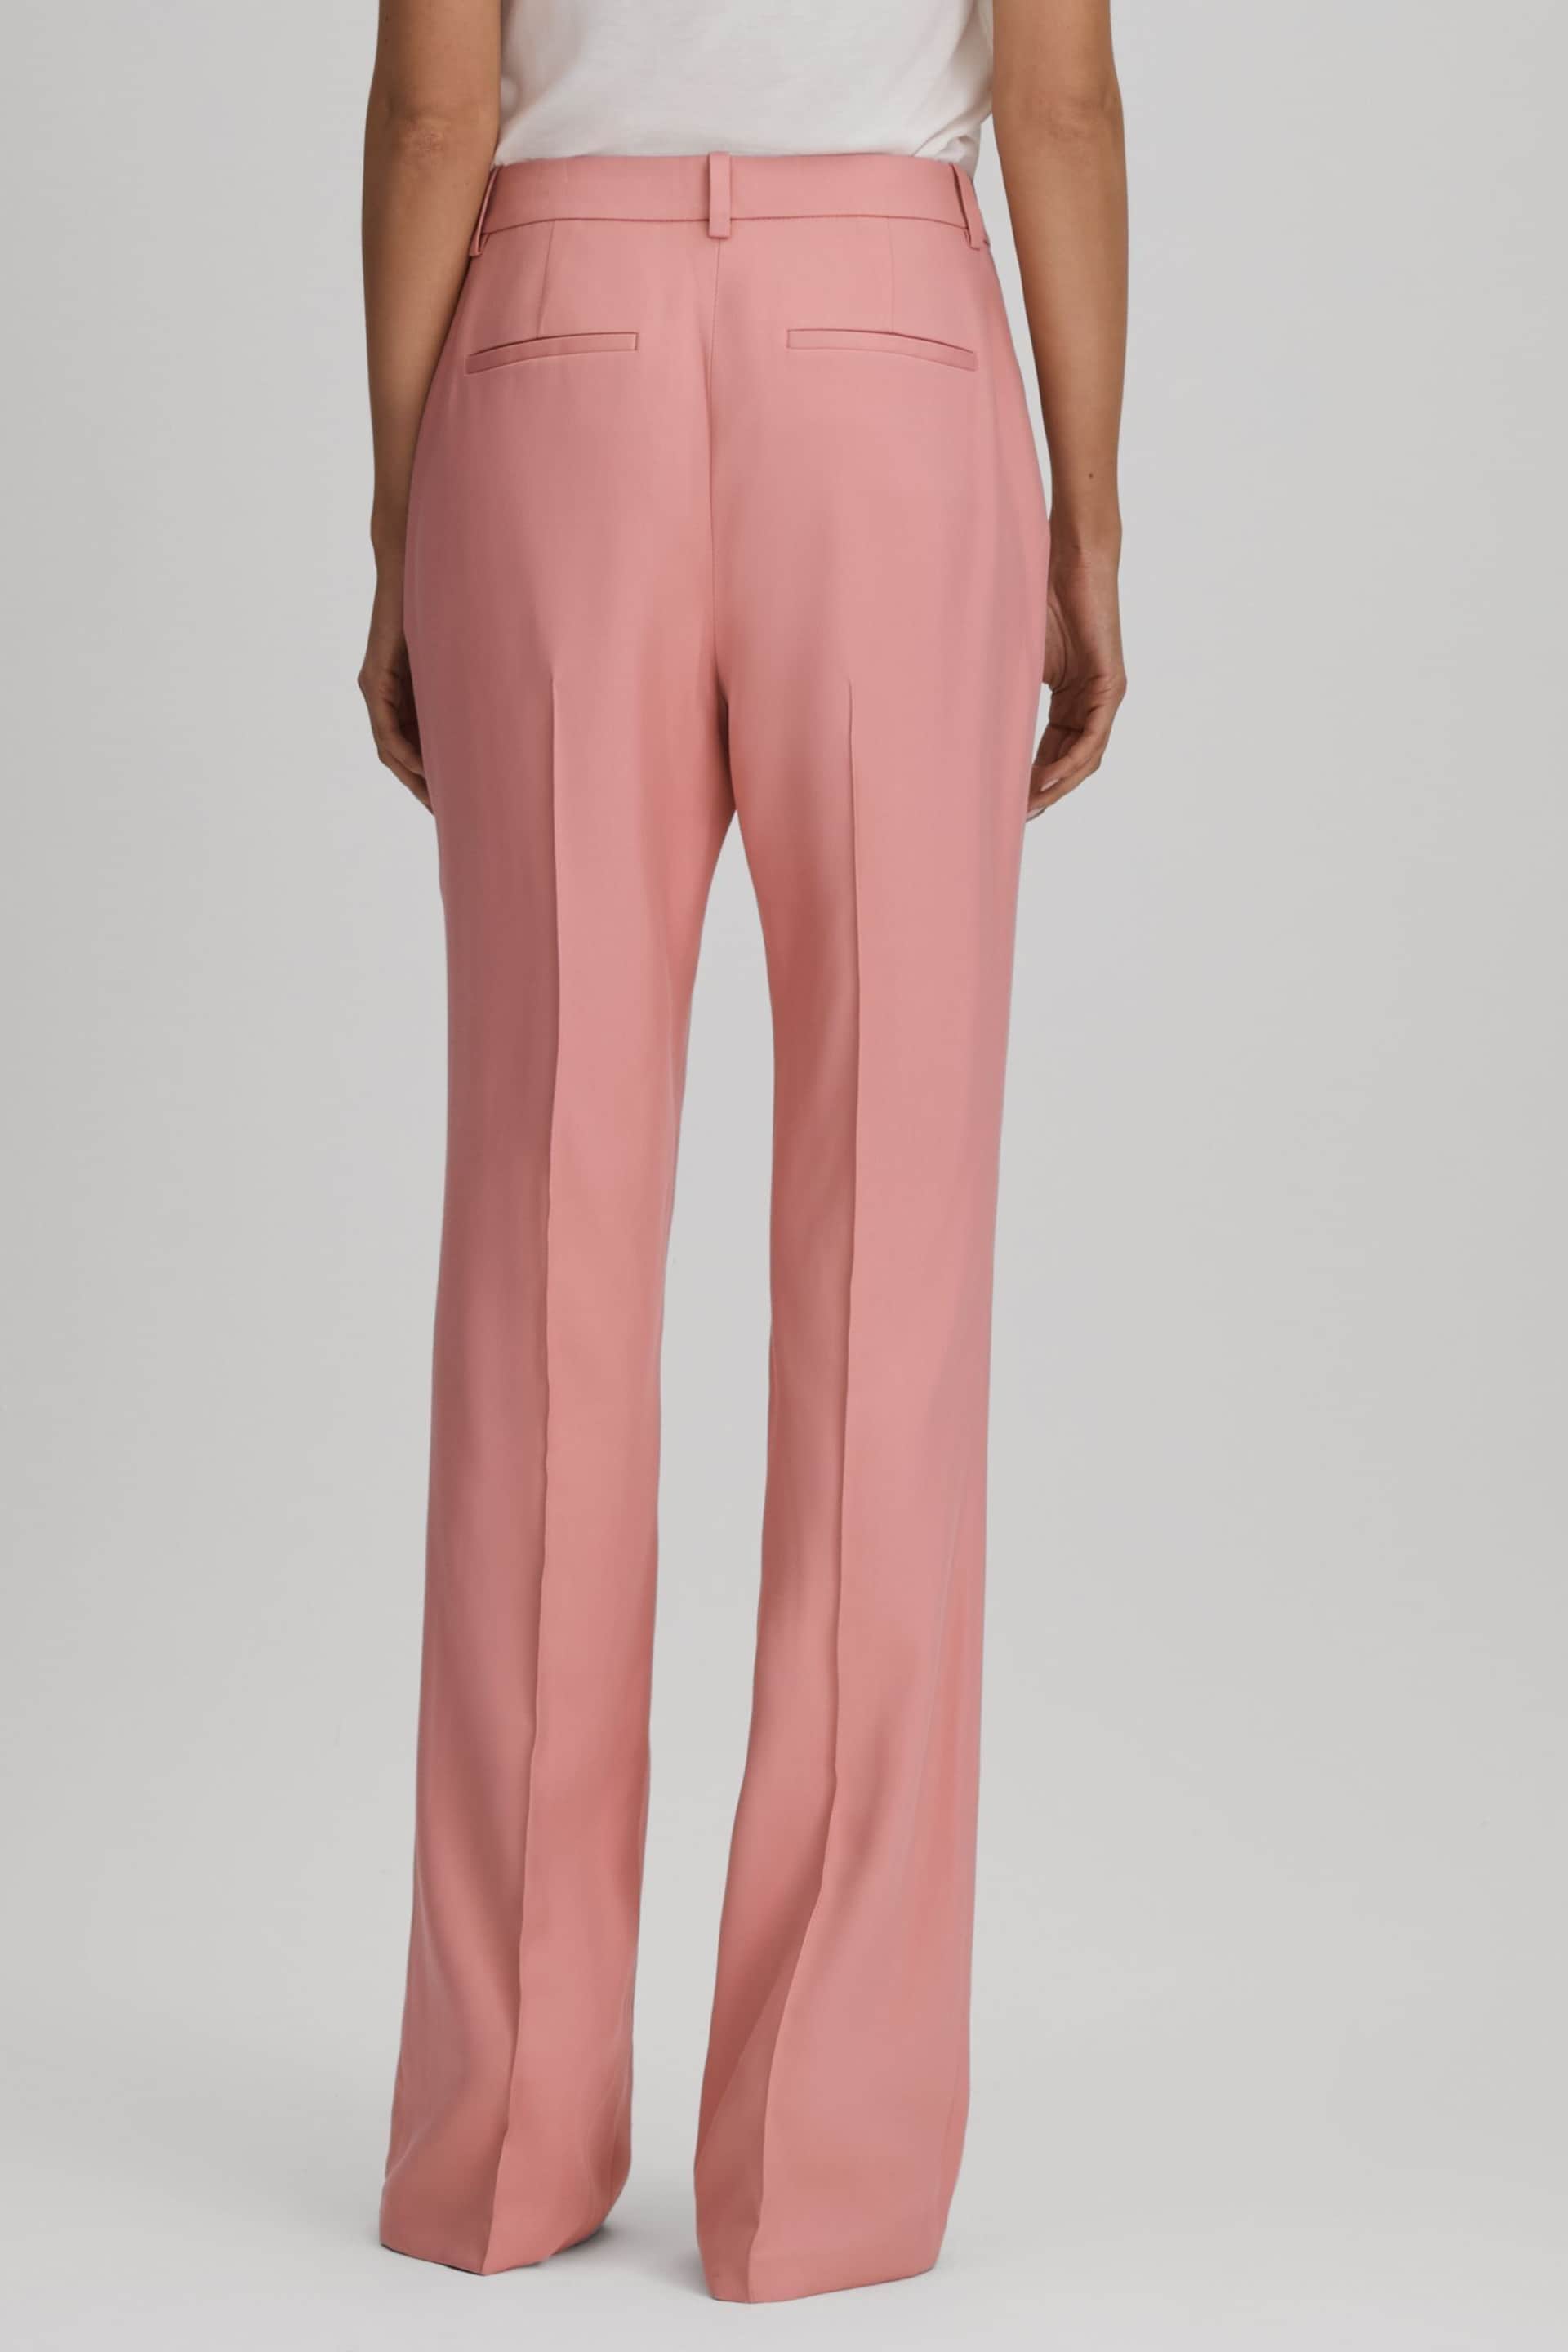 Reiss Pink Millie Flared Suit Trousers - Image 5 of 6